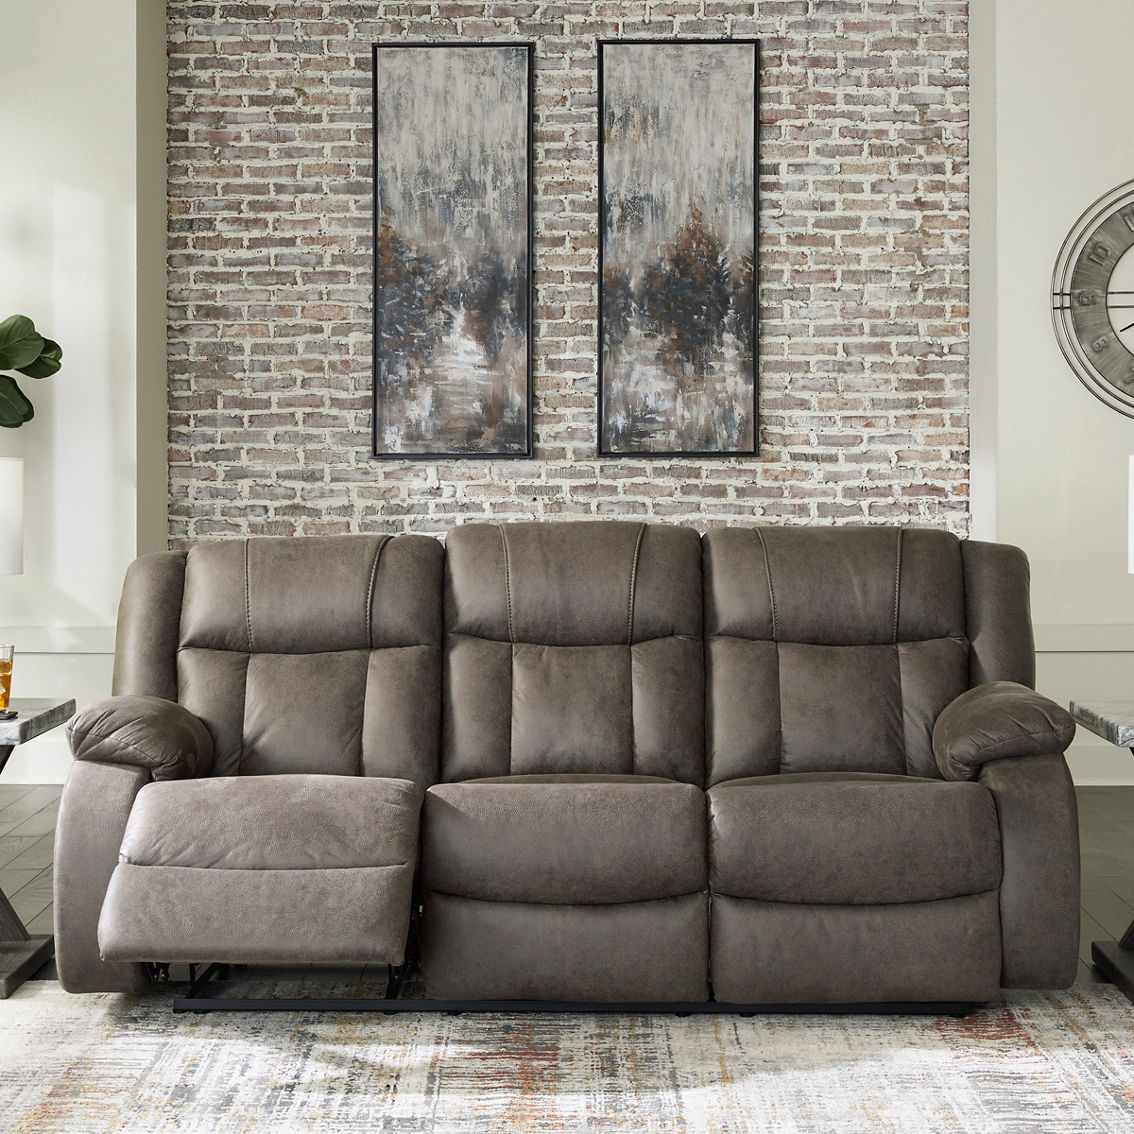 Signature Design by Ashley First Base 2 pc. Reclining Set: Sofa, Loveseat - Image 2 of 4